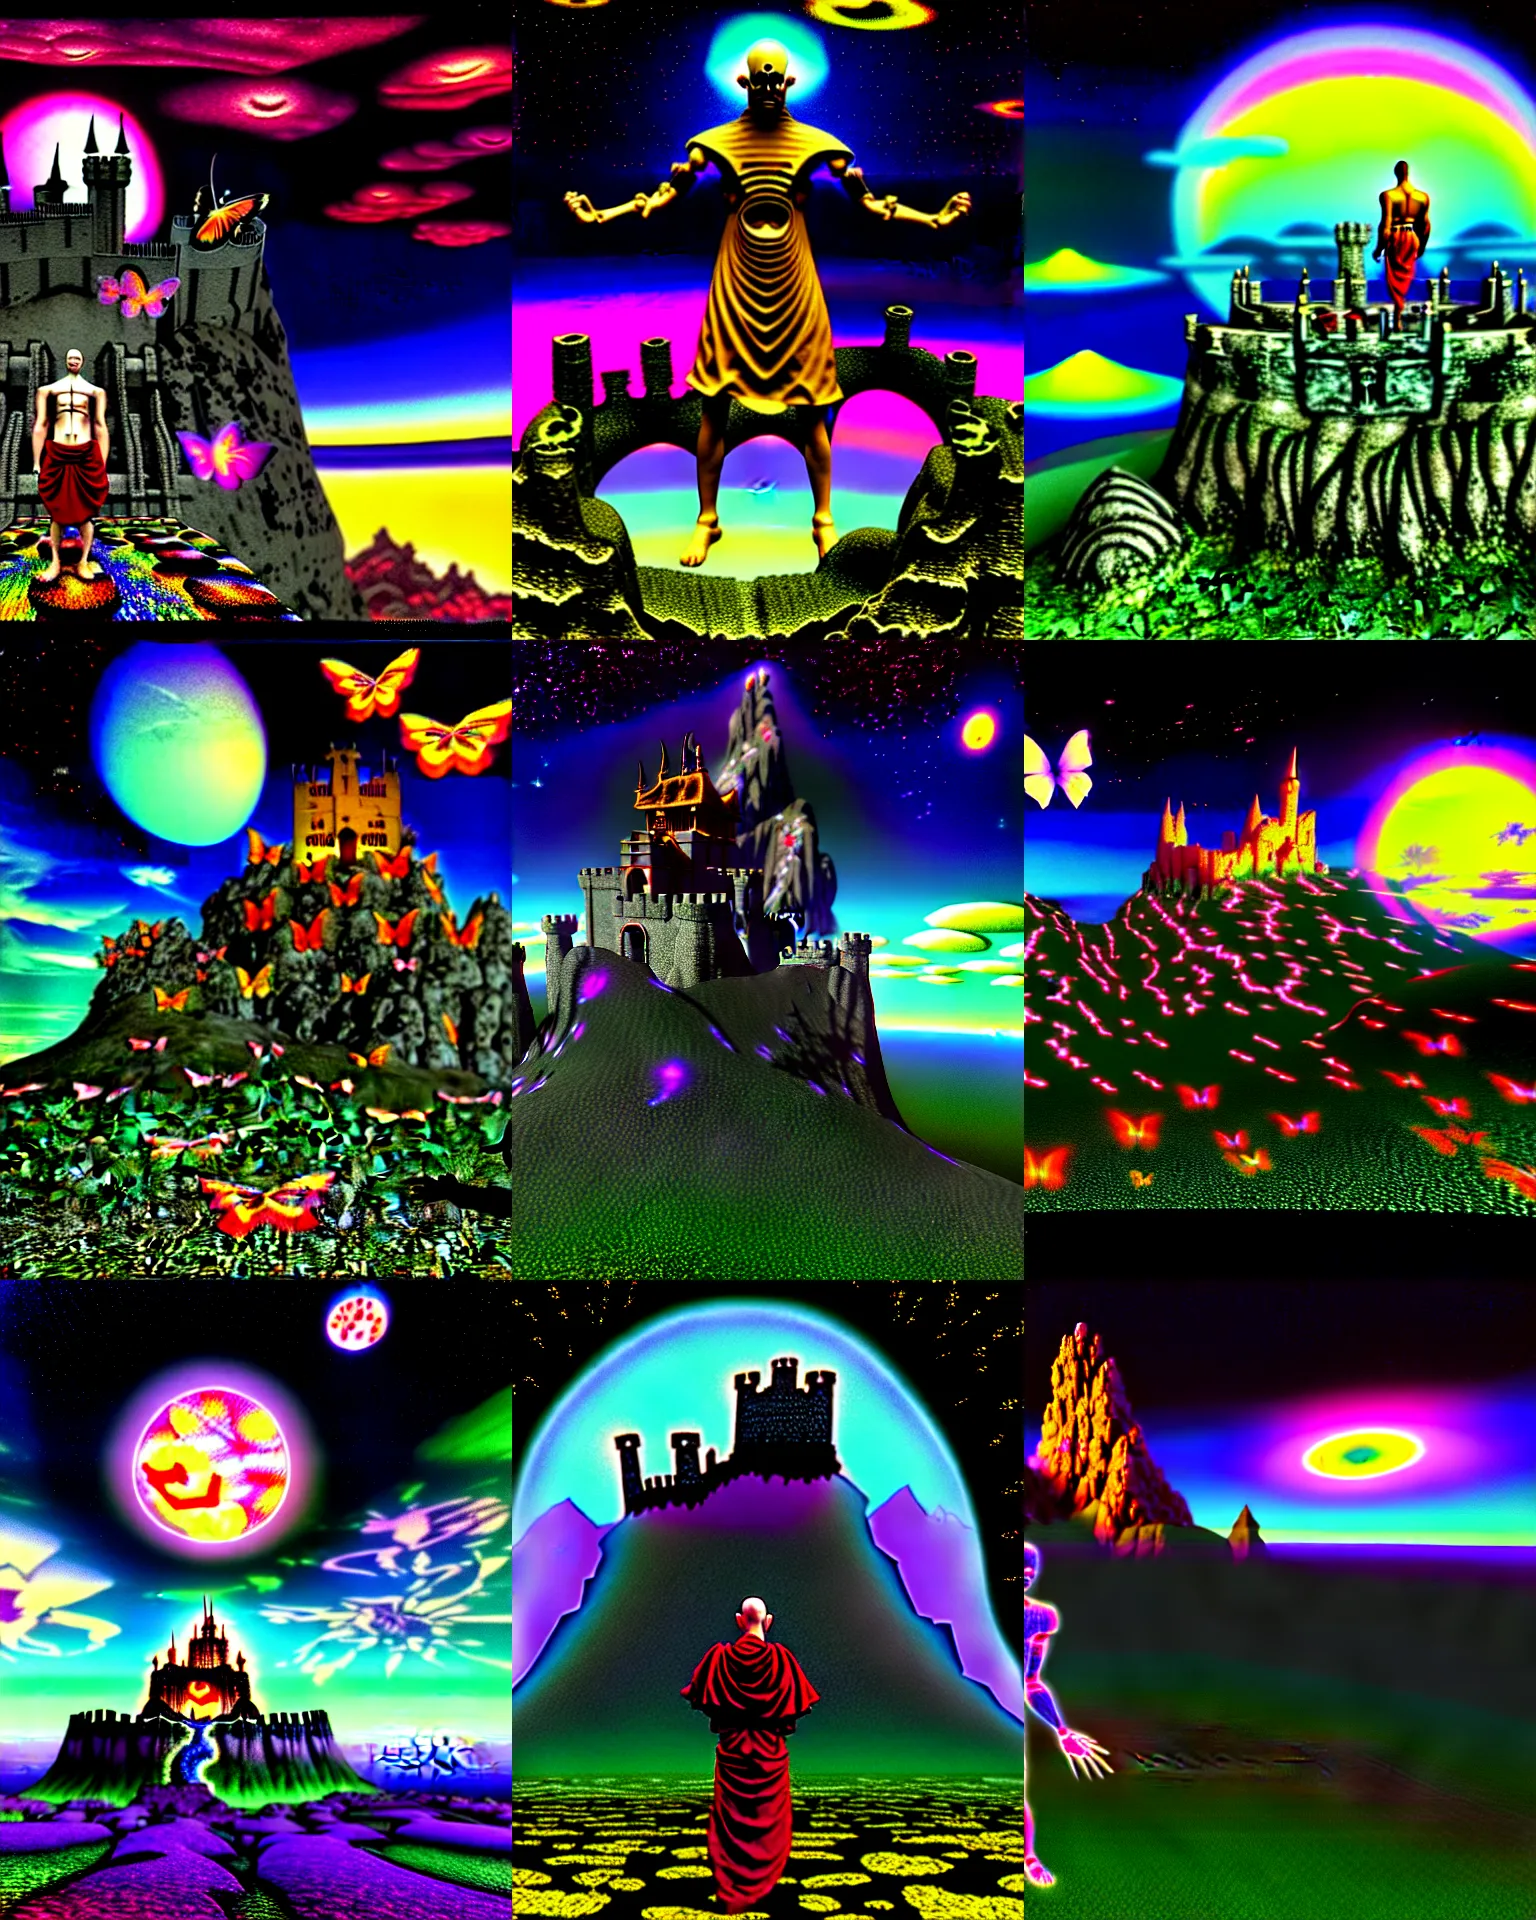 Prompt: 3 d render of cyborg demon monk standing in cgi mountain landscape with castle ruins against a psychedelic surreal background with 3 d butterflies and 3 d flowers n the style of 1 9 9 0's cg graphics against the cloudy night sky, lsd dream emulator psx, 3 d rendered y 2 k aesthetic by ichiro tanida, 3 do magazine, wide shot